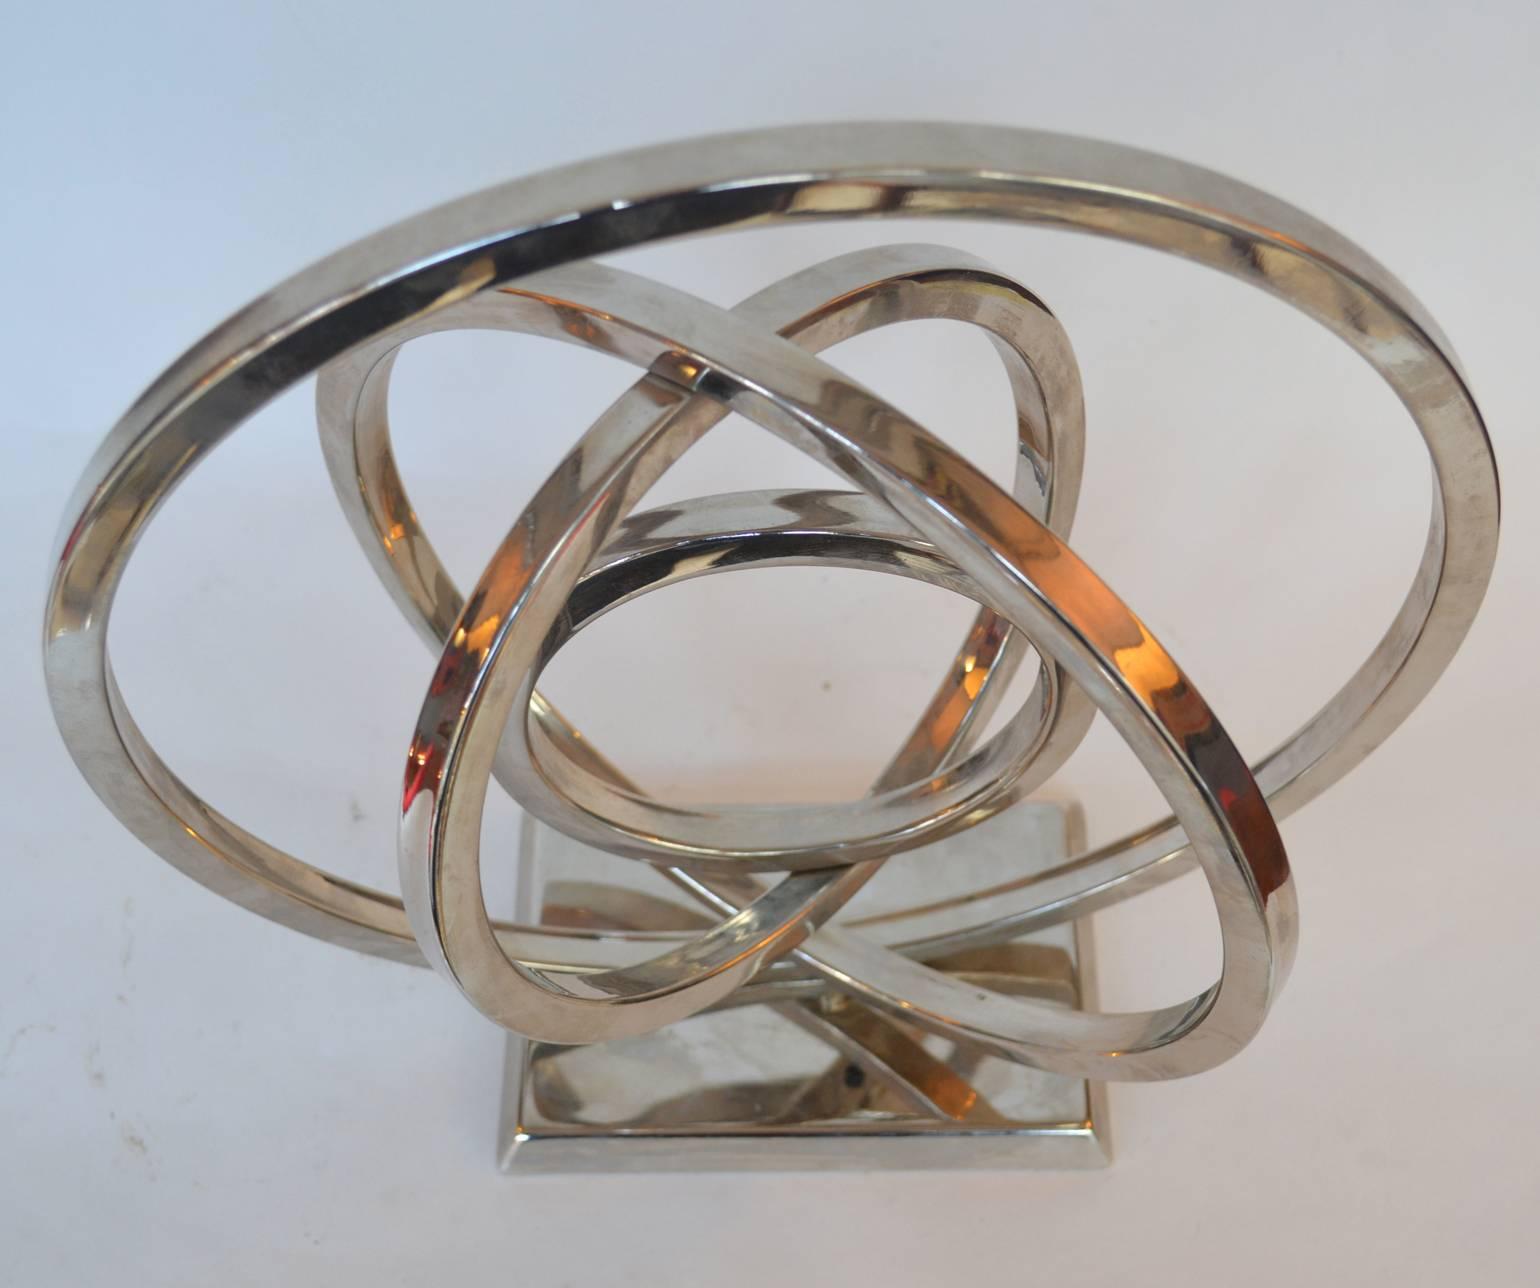 European Abstract Sculpture of Rings in Chrome Metal